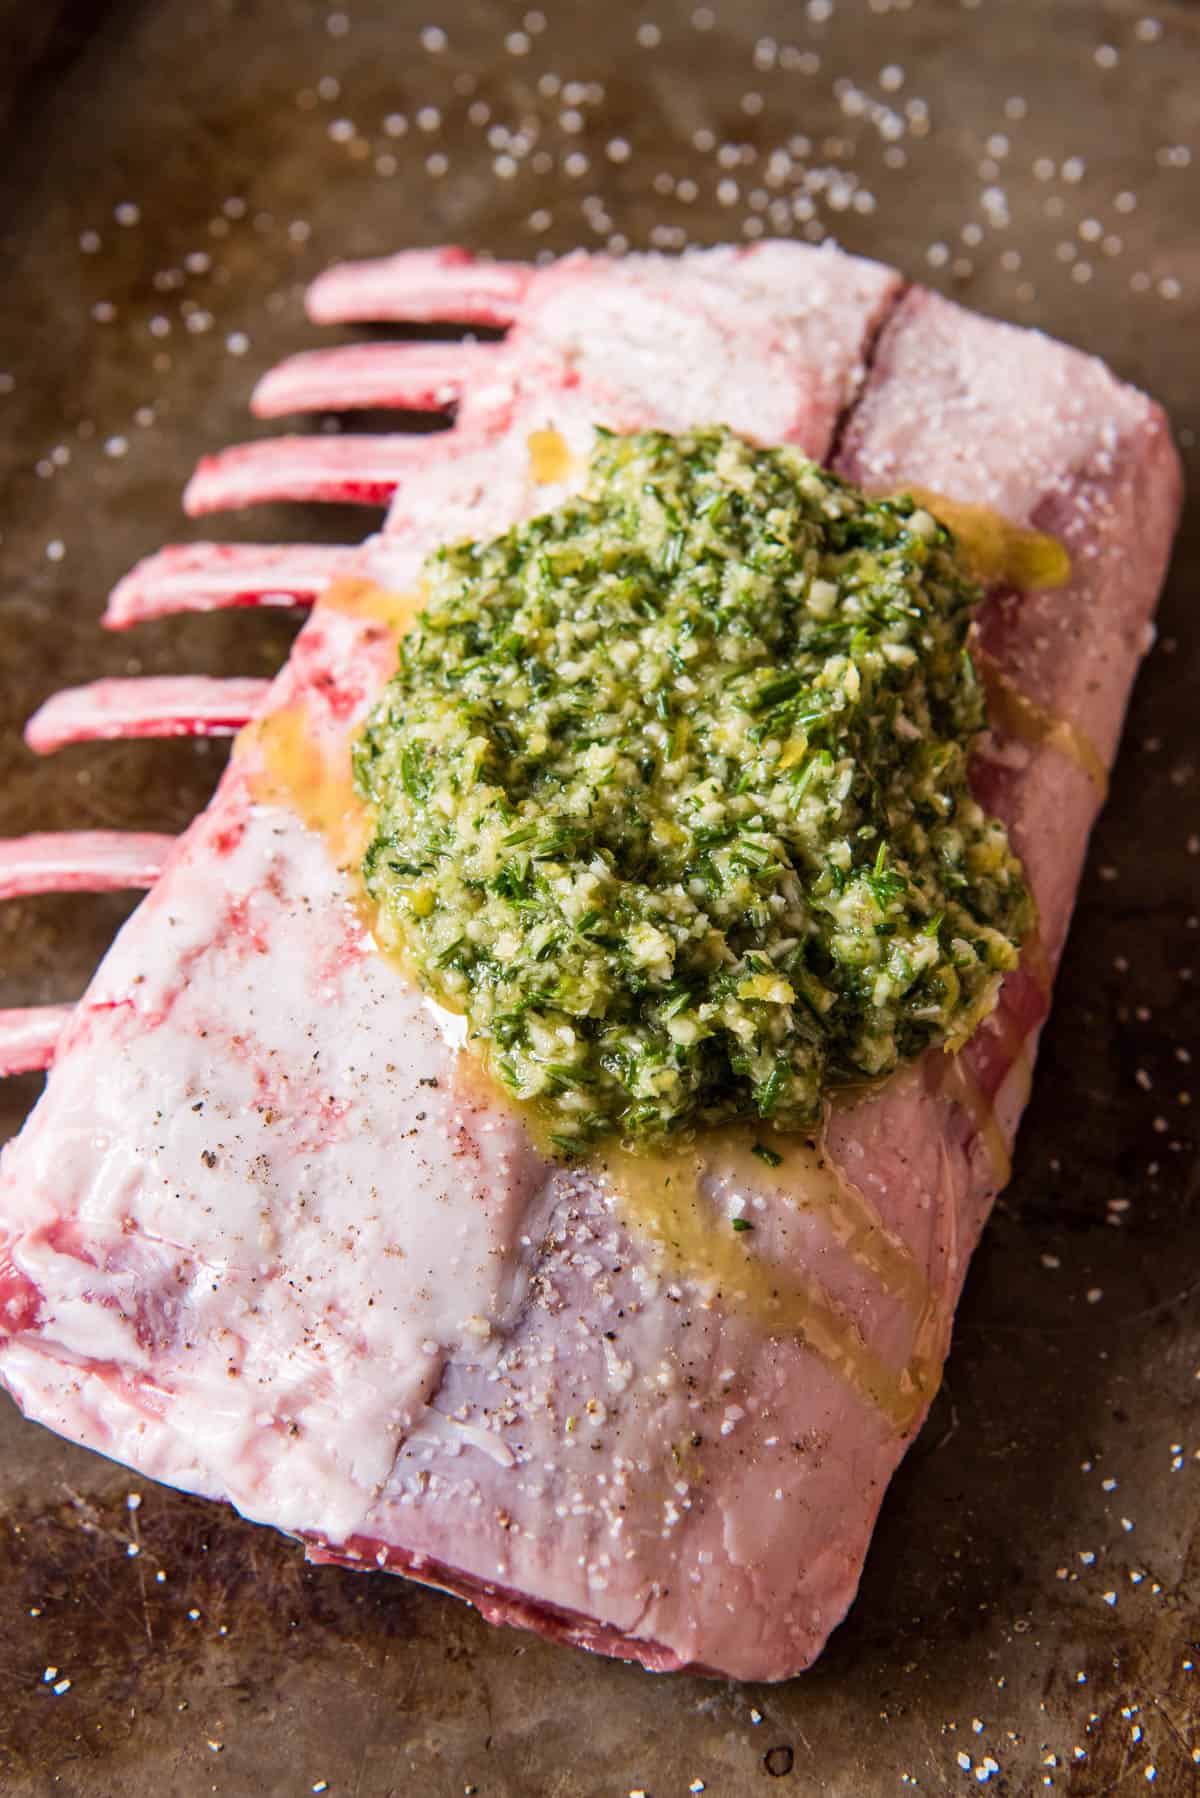 Rack of lamb fat side up with a marinade of olive oil, lemon zest, garlic, rosemary and thyme ready to be rubbed on it.